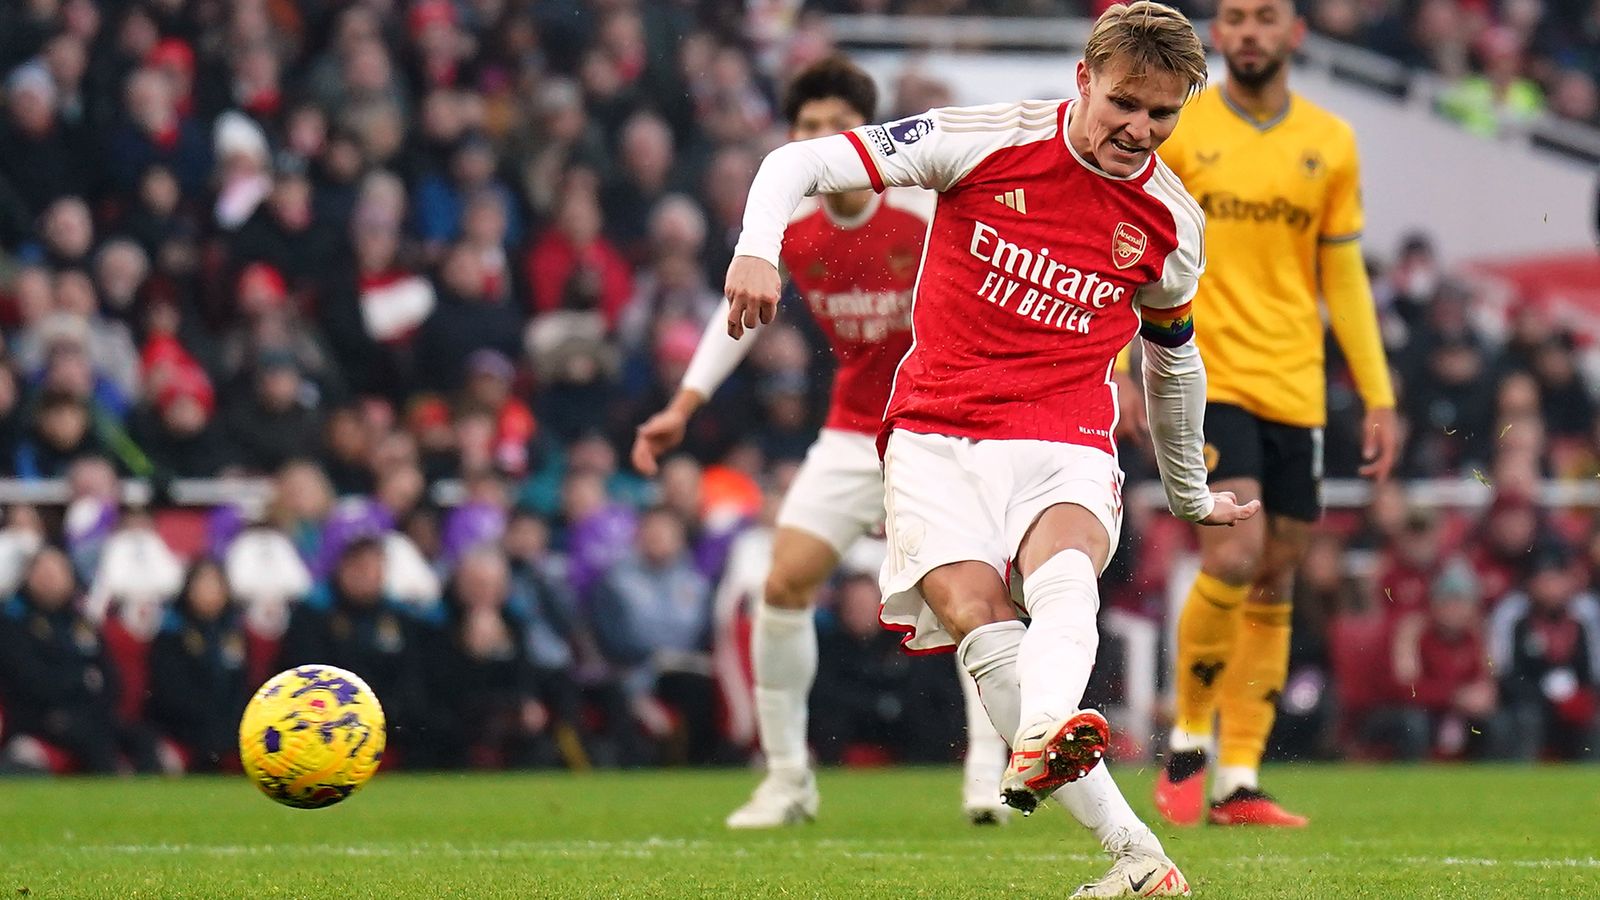 Arsenal beat Wolves to go four points clear